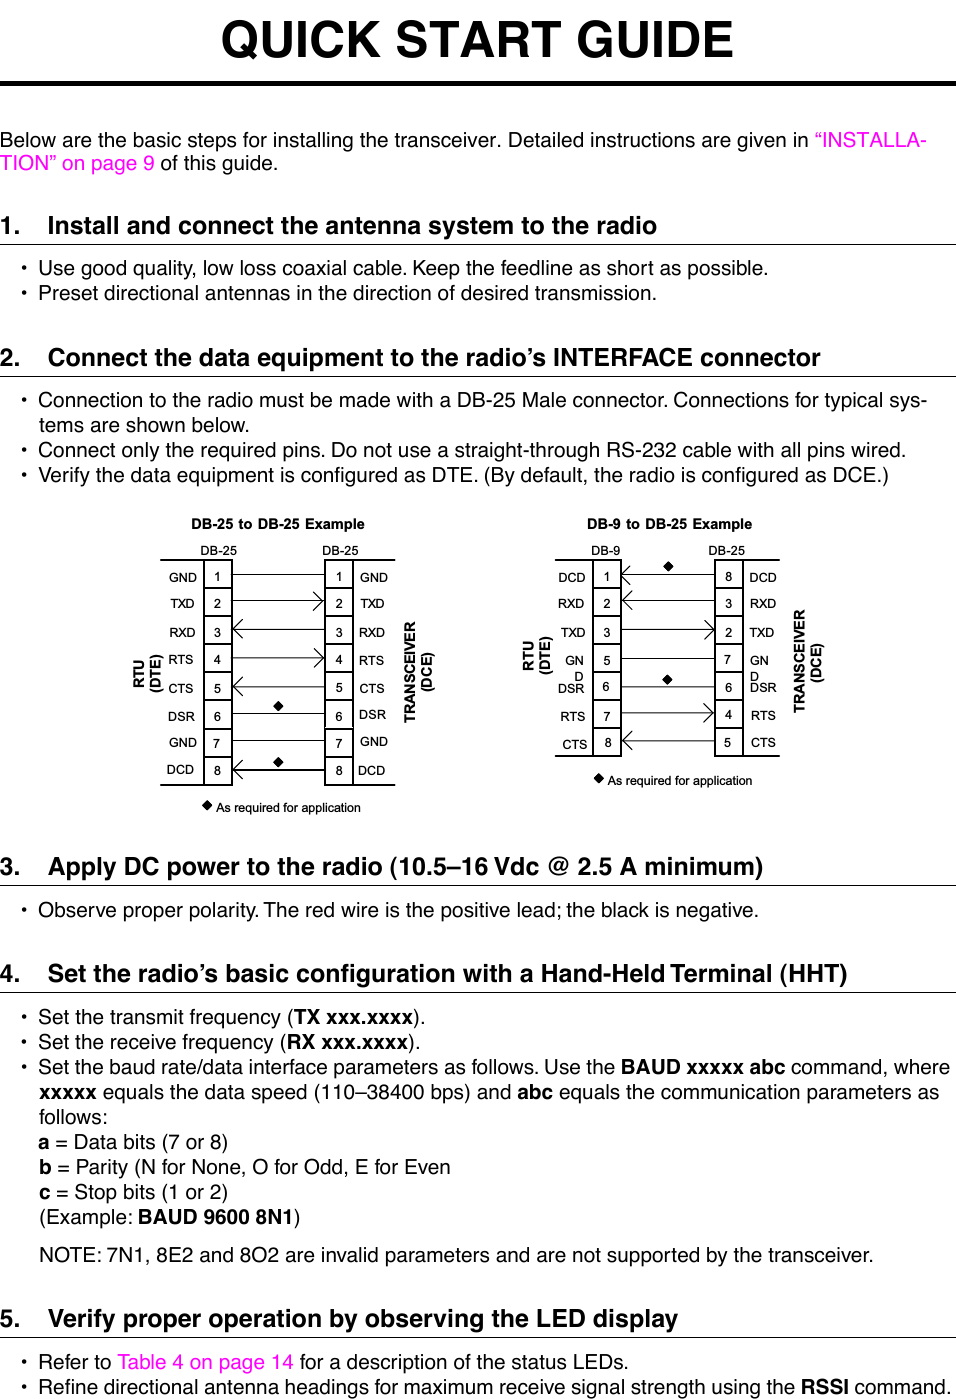  QUICK START GUIDE Below are the basic steps for installing the transceiver. Detailed instructions are given in ÒINSTALLA-TIONÓ on page 9 of this guide. 1. Install and connect the antenna system to the radio ¥ Use good quality, low loss coaxial cable. Keep the feedline as short as possible.¥ Preset directional antennas in the direction of desired transmission. 2. Connect the data equipment to the radioÕs INTERFACE connector ¥ Connection to the radio must be made with a DB-25 Male connector. Connections for typical sys-tems are shown below. ¥ Connect only the required pins. Do not use a straight-through RS-232 cable with all pins wired.¥ Verify the data equipment is conÞgured as DTE. (By default, the radio is conÞgured as DCE.) 3. Apply DC power to the radio (10.5Ð16 Vdc @ 2.5 A minimum) ¥ Observe proper polarity. The red wire is the positive lead; the black is negative. 4. Set the radioÕs basic conÞguration with a Hand-Held Terminal (HHT) ¥ Set the transmit frequency ( TX xxx.xxxx ).¥ Set the receive frequency ( RX xxx.xxxx ).¥ Set the baud rate/data interface parameters as follows. Use the  BAUD xxxxx abc  command, where  xxxxx  equals the data speed (110Ð38400 bps) and  abc  equals the communication parameters as follows: a  = Data bits (7 or 8) b  = Parity (N for None, O for Odd, E for Even c  = Stop bits (1 or 2)(Example:  BAUD 9600 8N1 )NOTE: 7N1, 8E2 and 8O2 are invalid parameters and are not supported by the transceiver. 5. Verify proper operation by observing the LED display ¥ Refer to Table 4 on page 14 for a description of the status LEDs.¥ ReÞne directional antenna headings for maximum receive signal strength using the  RSSI  command. DB-25 DB-25TRANSCEIVER(DCE)2323RTU(DTE)45206DSR DSR6TXDRXDGNDRTSCTSTXDRXDGND4CTS5RTSDB-9 DB-25DB-9 to DB-25 ExampleDB-25 to DB-25 Example1145TRANSCEIVER(DCE)2332RTU(DTE)5207RXDTXDDCDGNDDSRRTSRXDTXDDCDGNDAs required for application51876CTSDSRRTSCTS864577GND GND8 8DCD DCDAs required for application